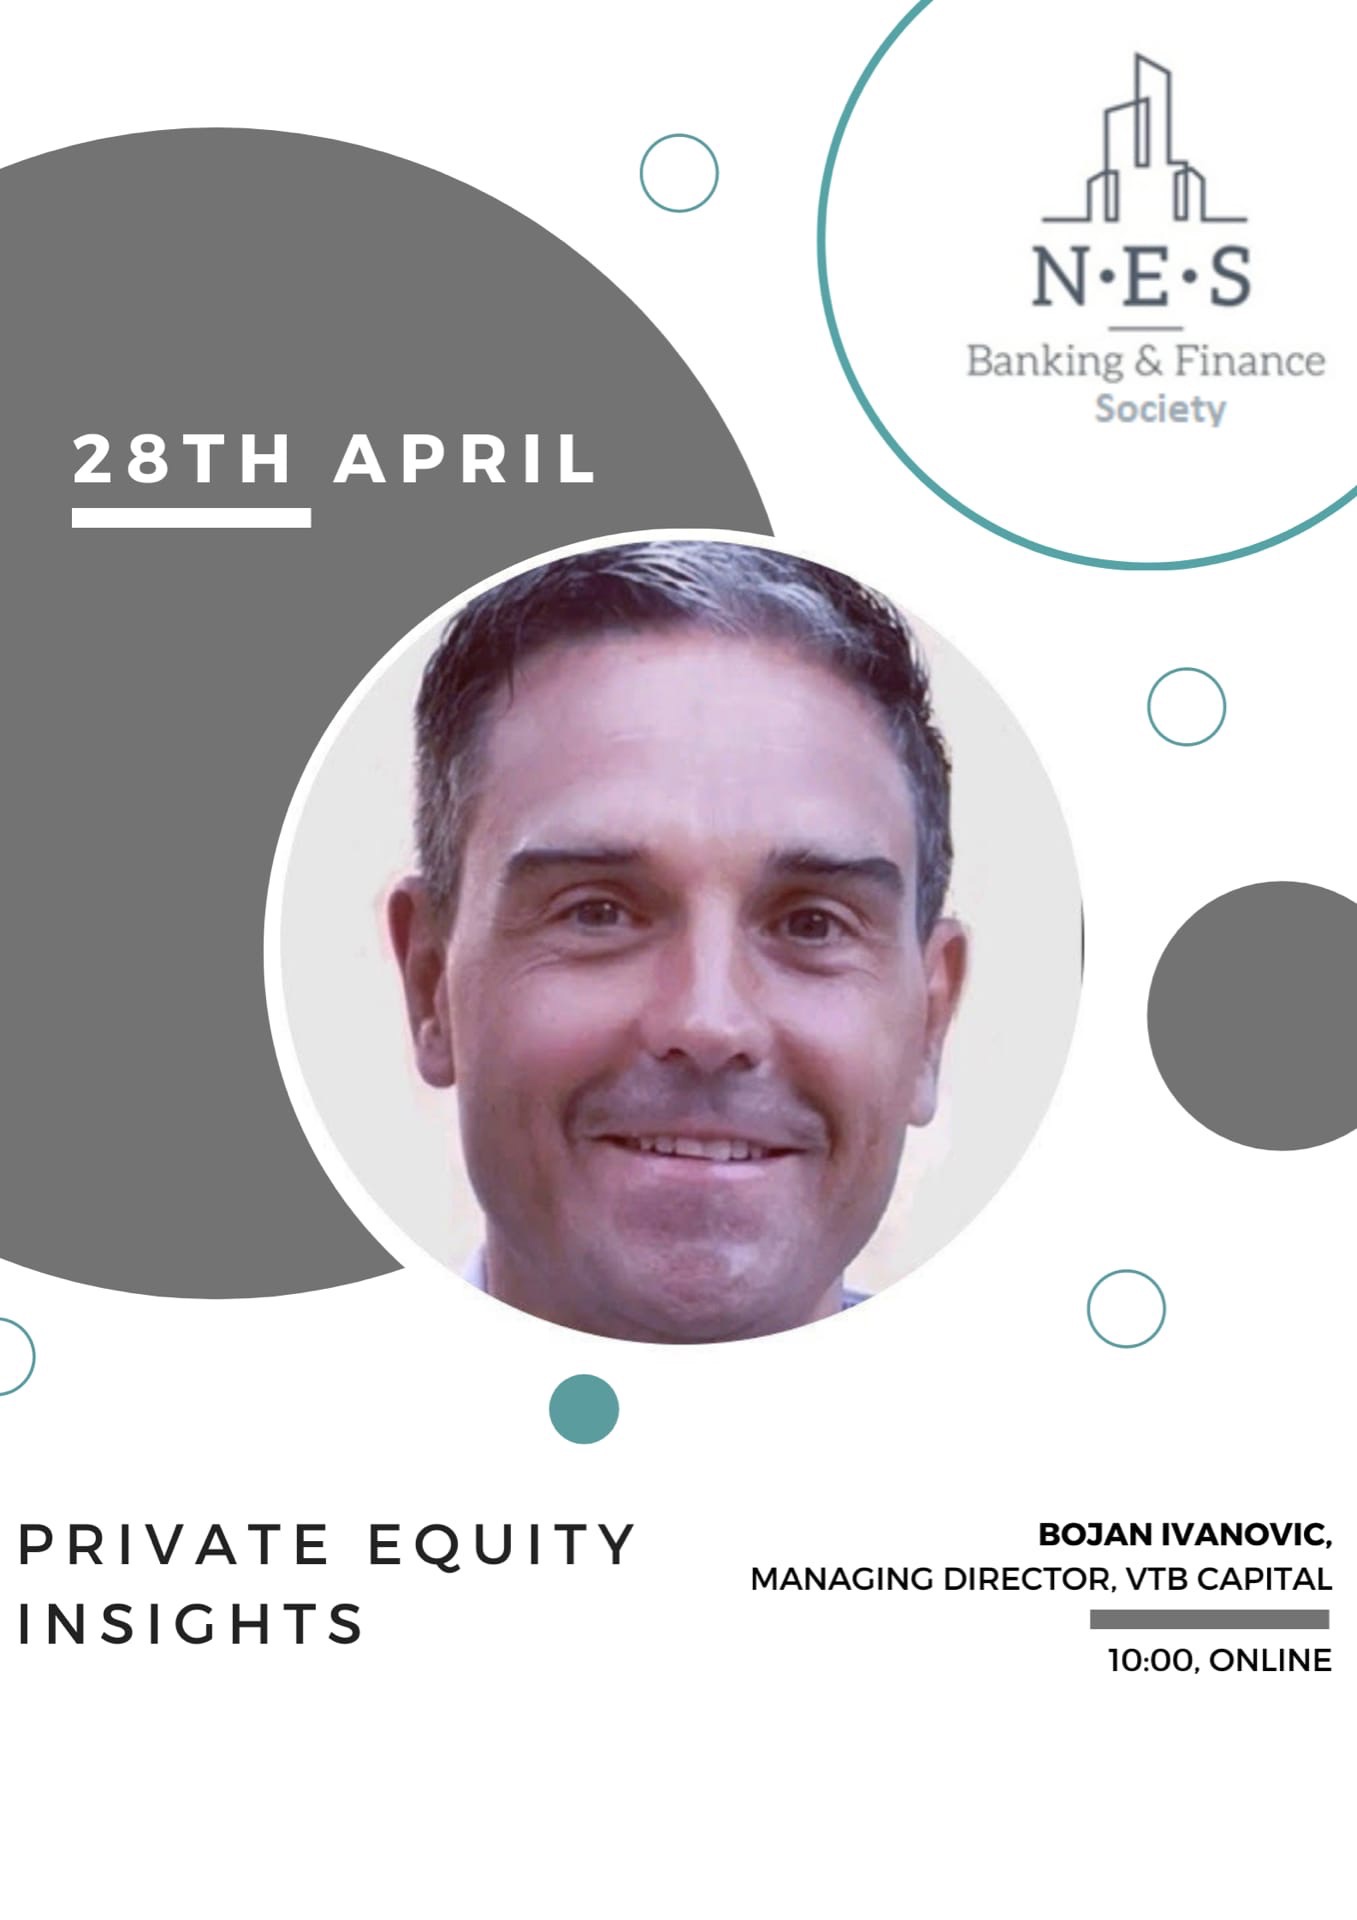 Bojan Ivanovich – managing director and head of Private Equity & Special Situations portfolio management, VTB